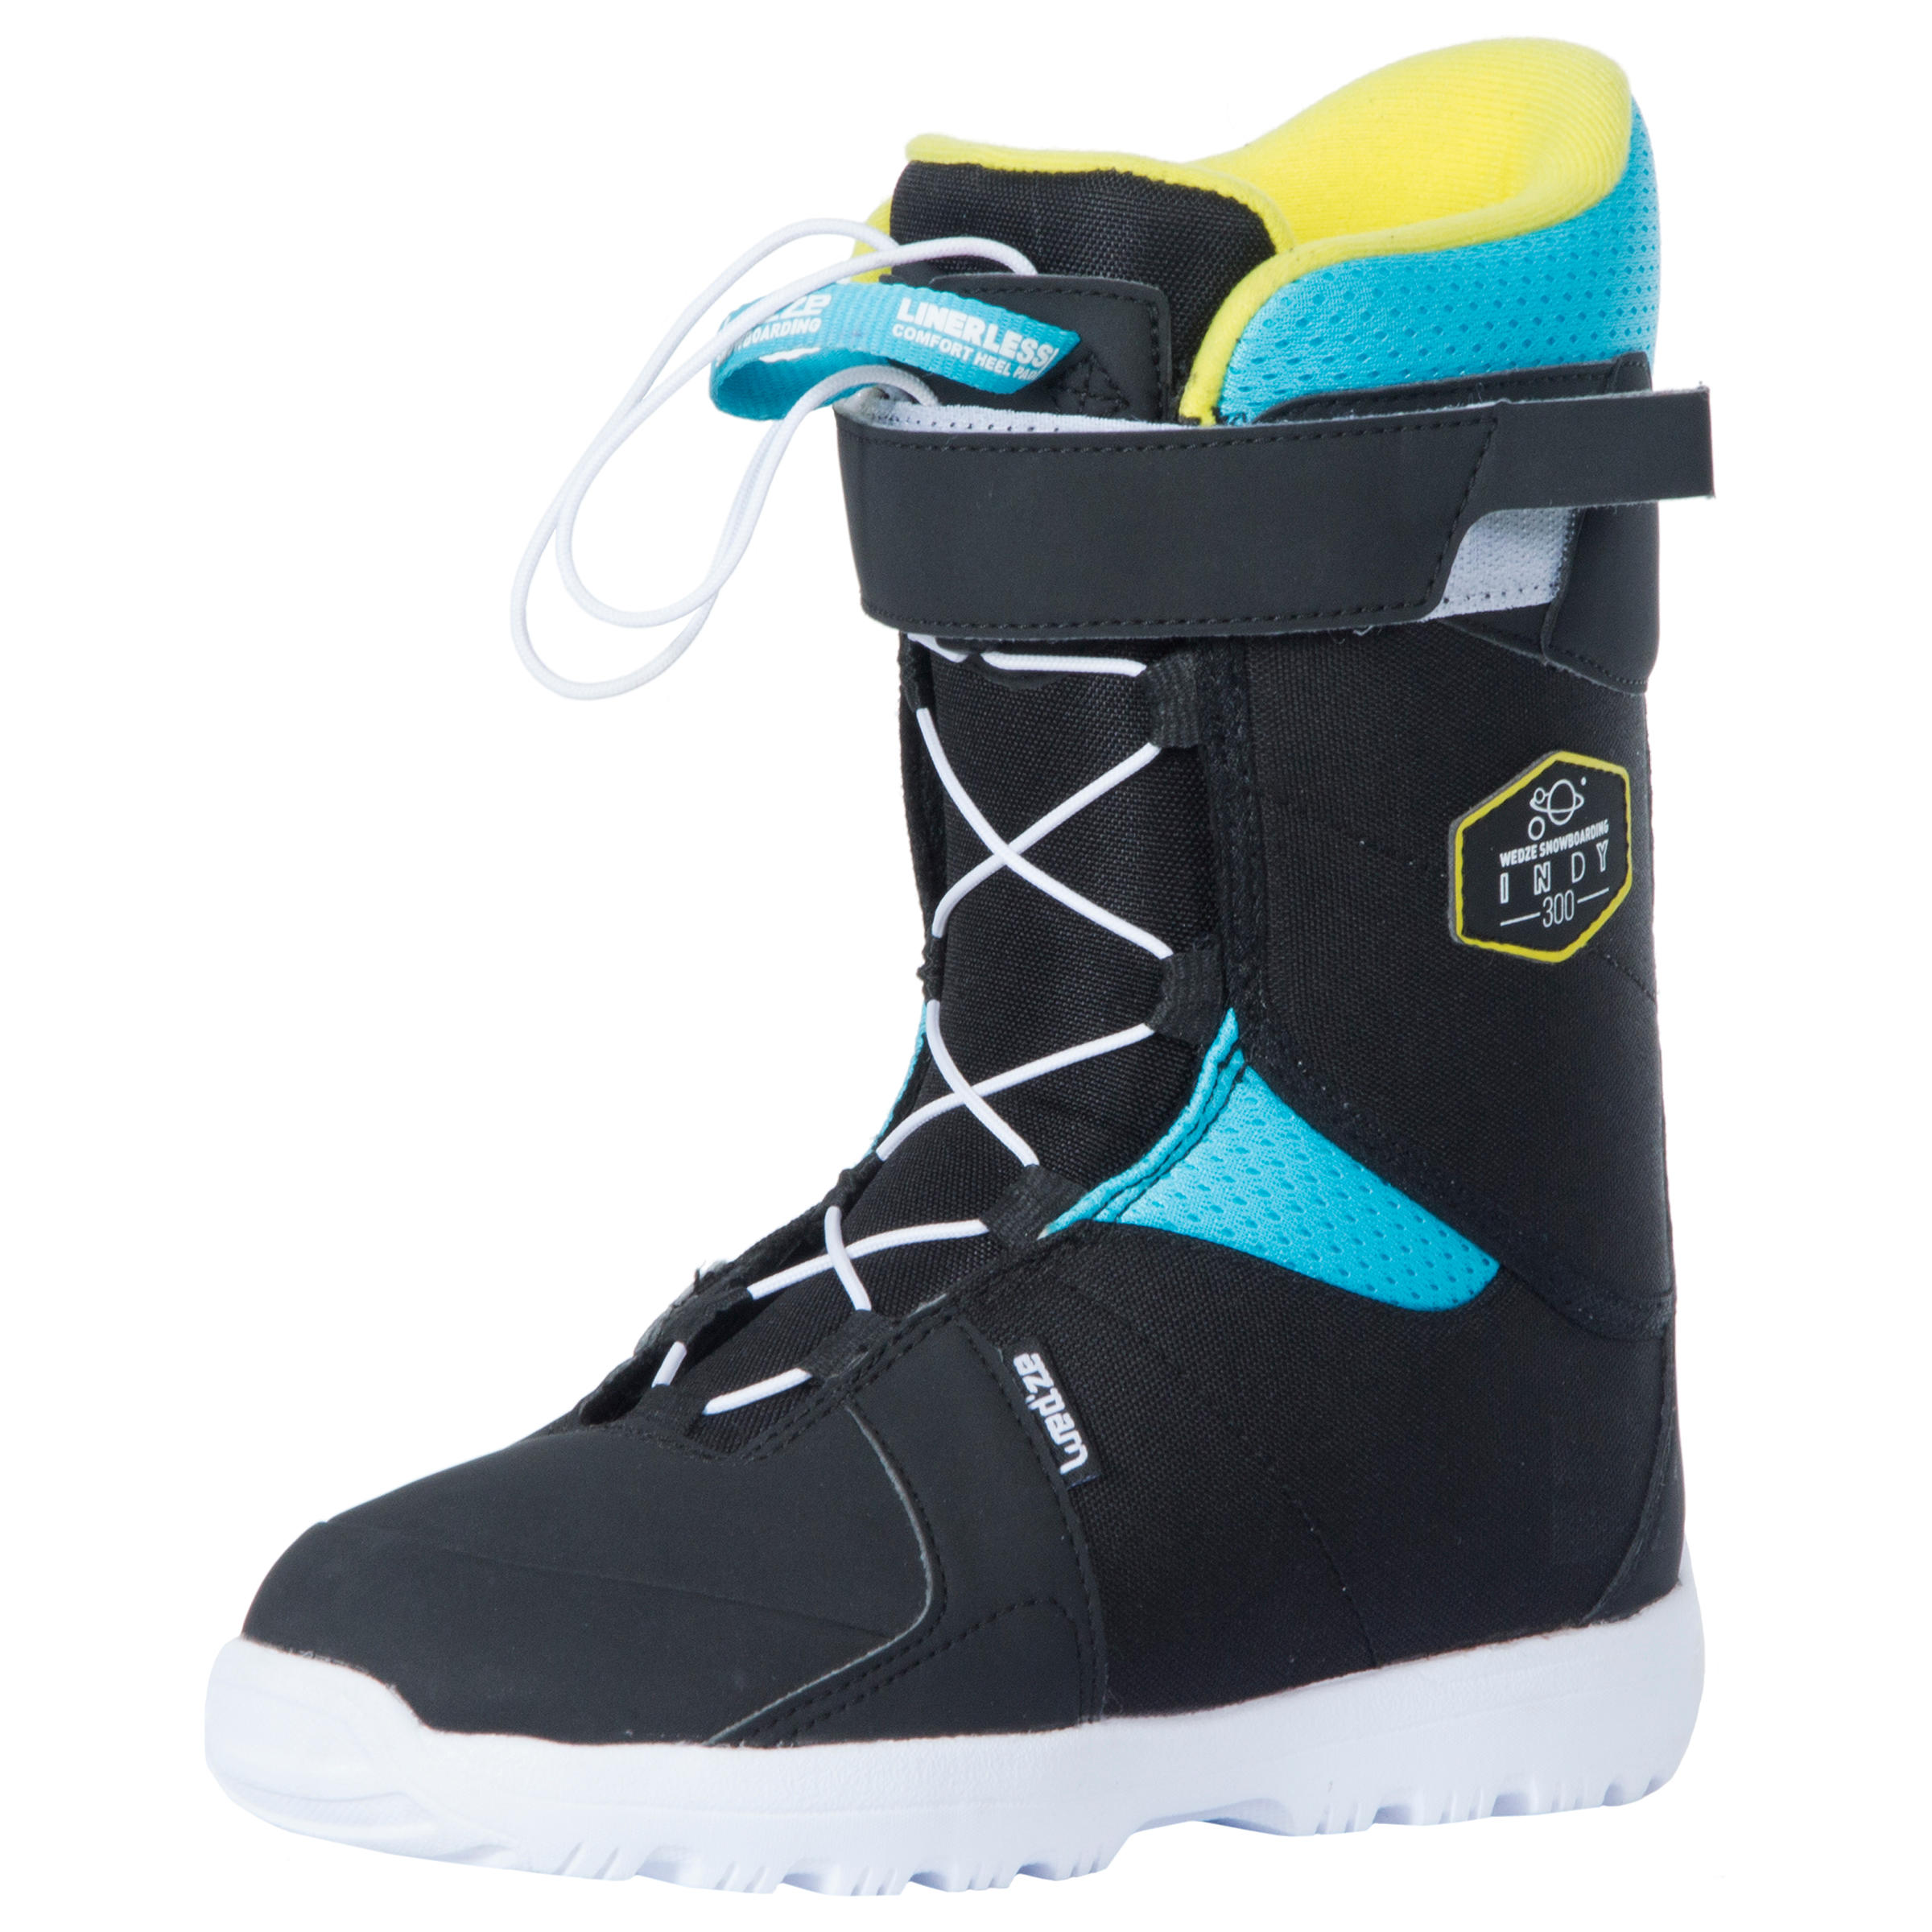 Boots snowboard all mountain/freestyle Indy 300 Copii decathlon.ro imagine noua